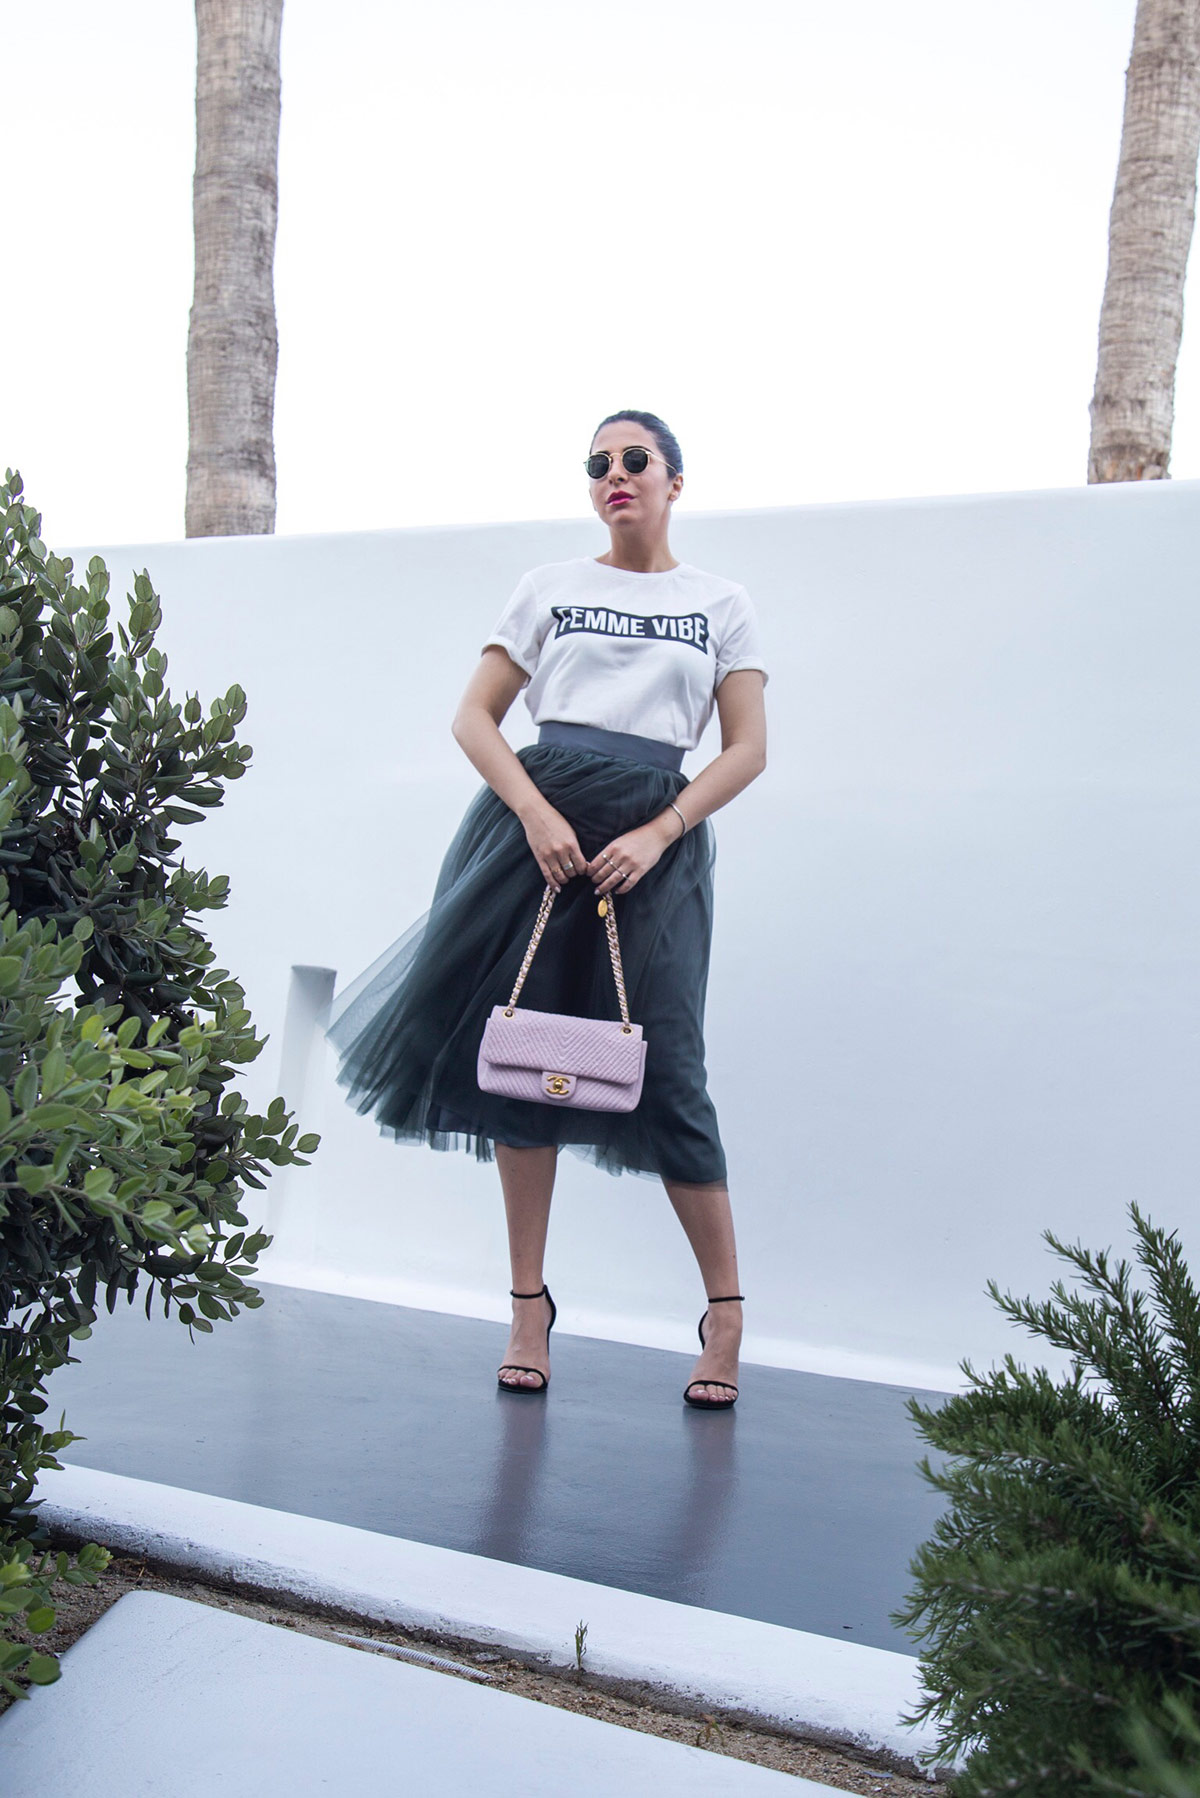 Stella Asteria wearing tulle skirt with logo top, Stuart Weitzman sandals & pink Chanel bag 